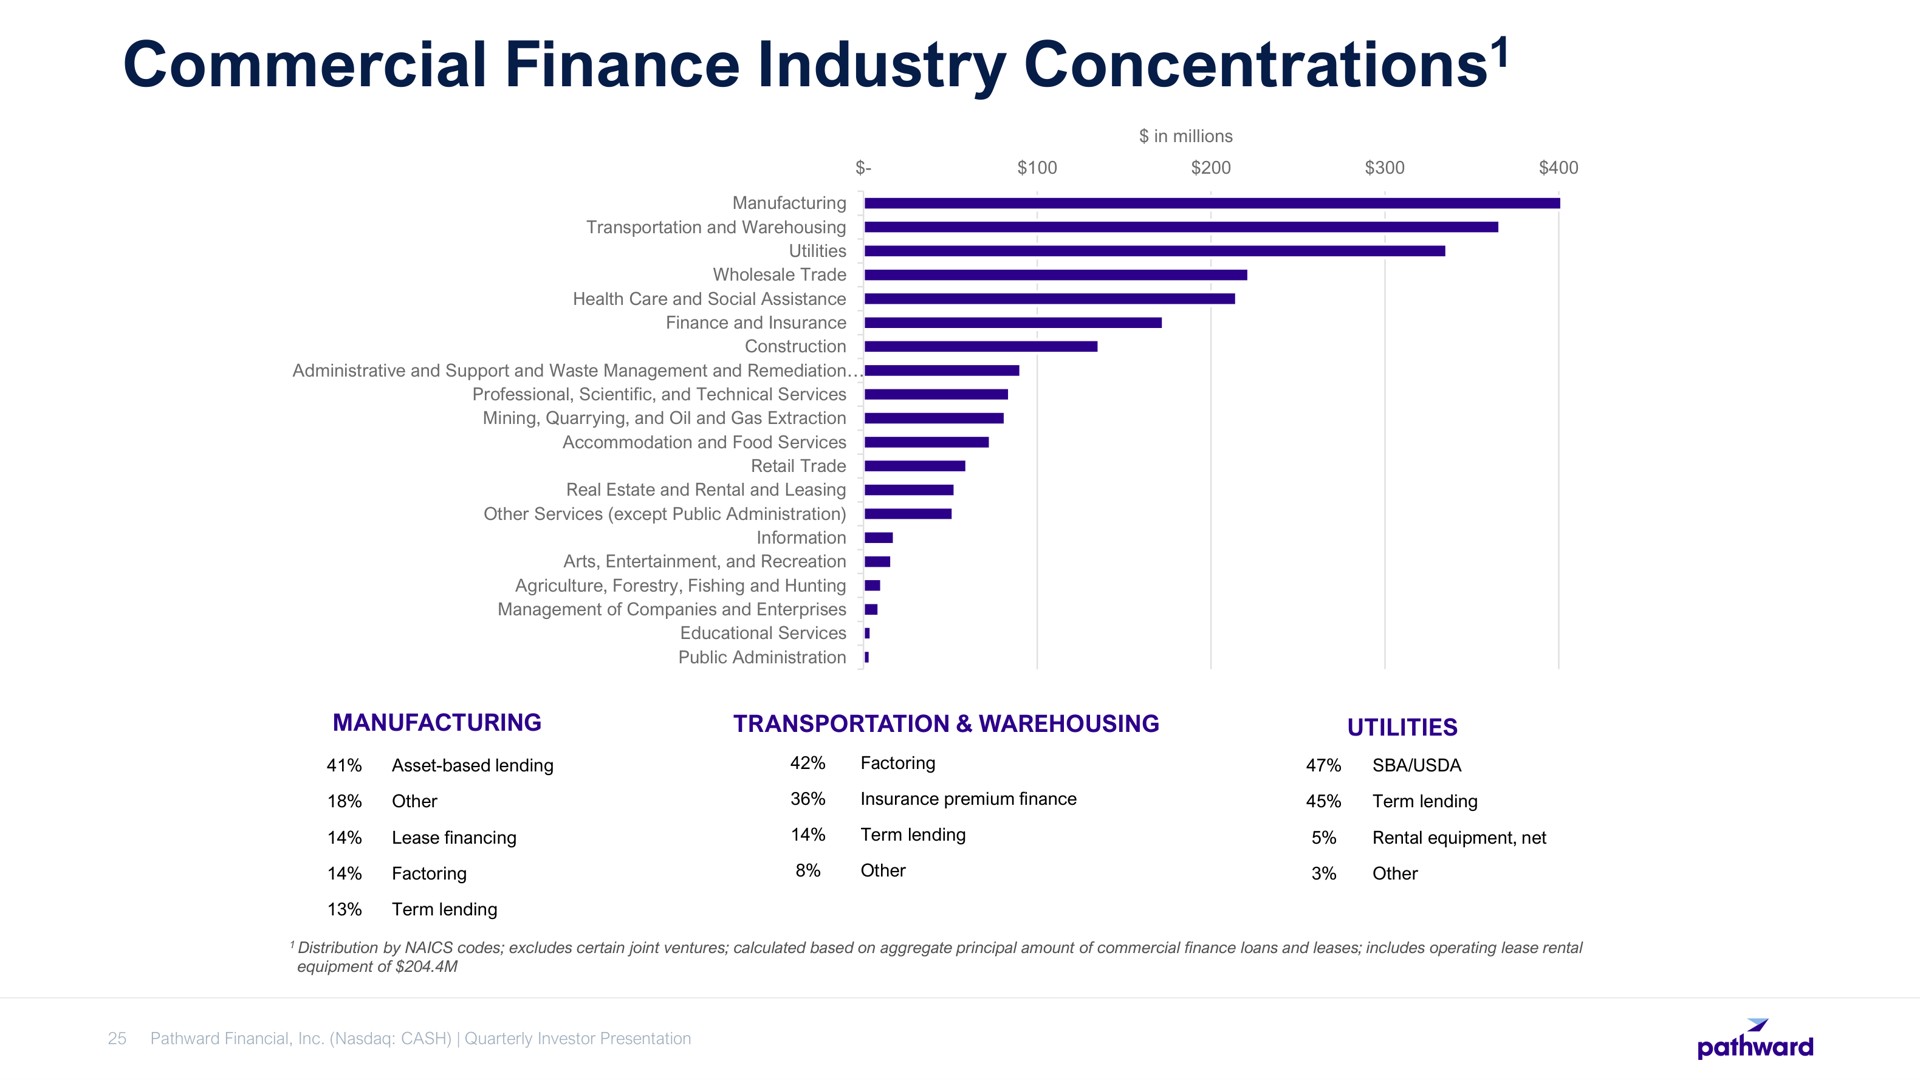 commercial finance industry concentrations concentrations | Pathward Financial